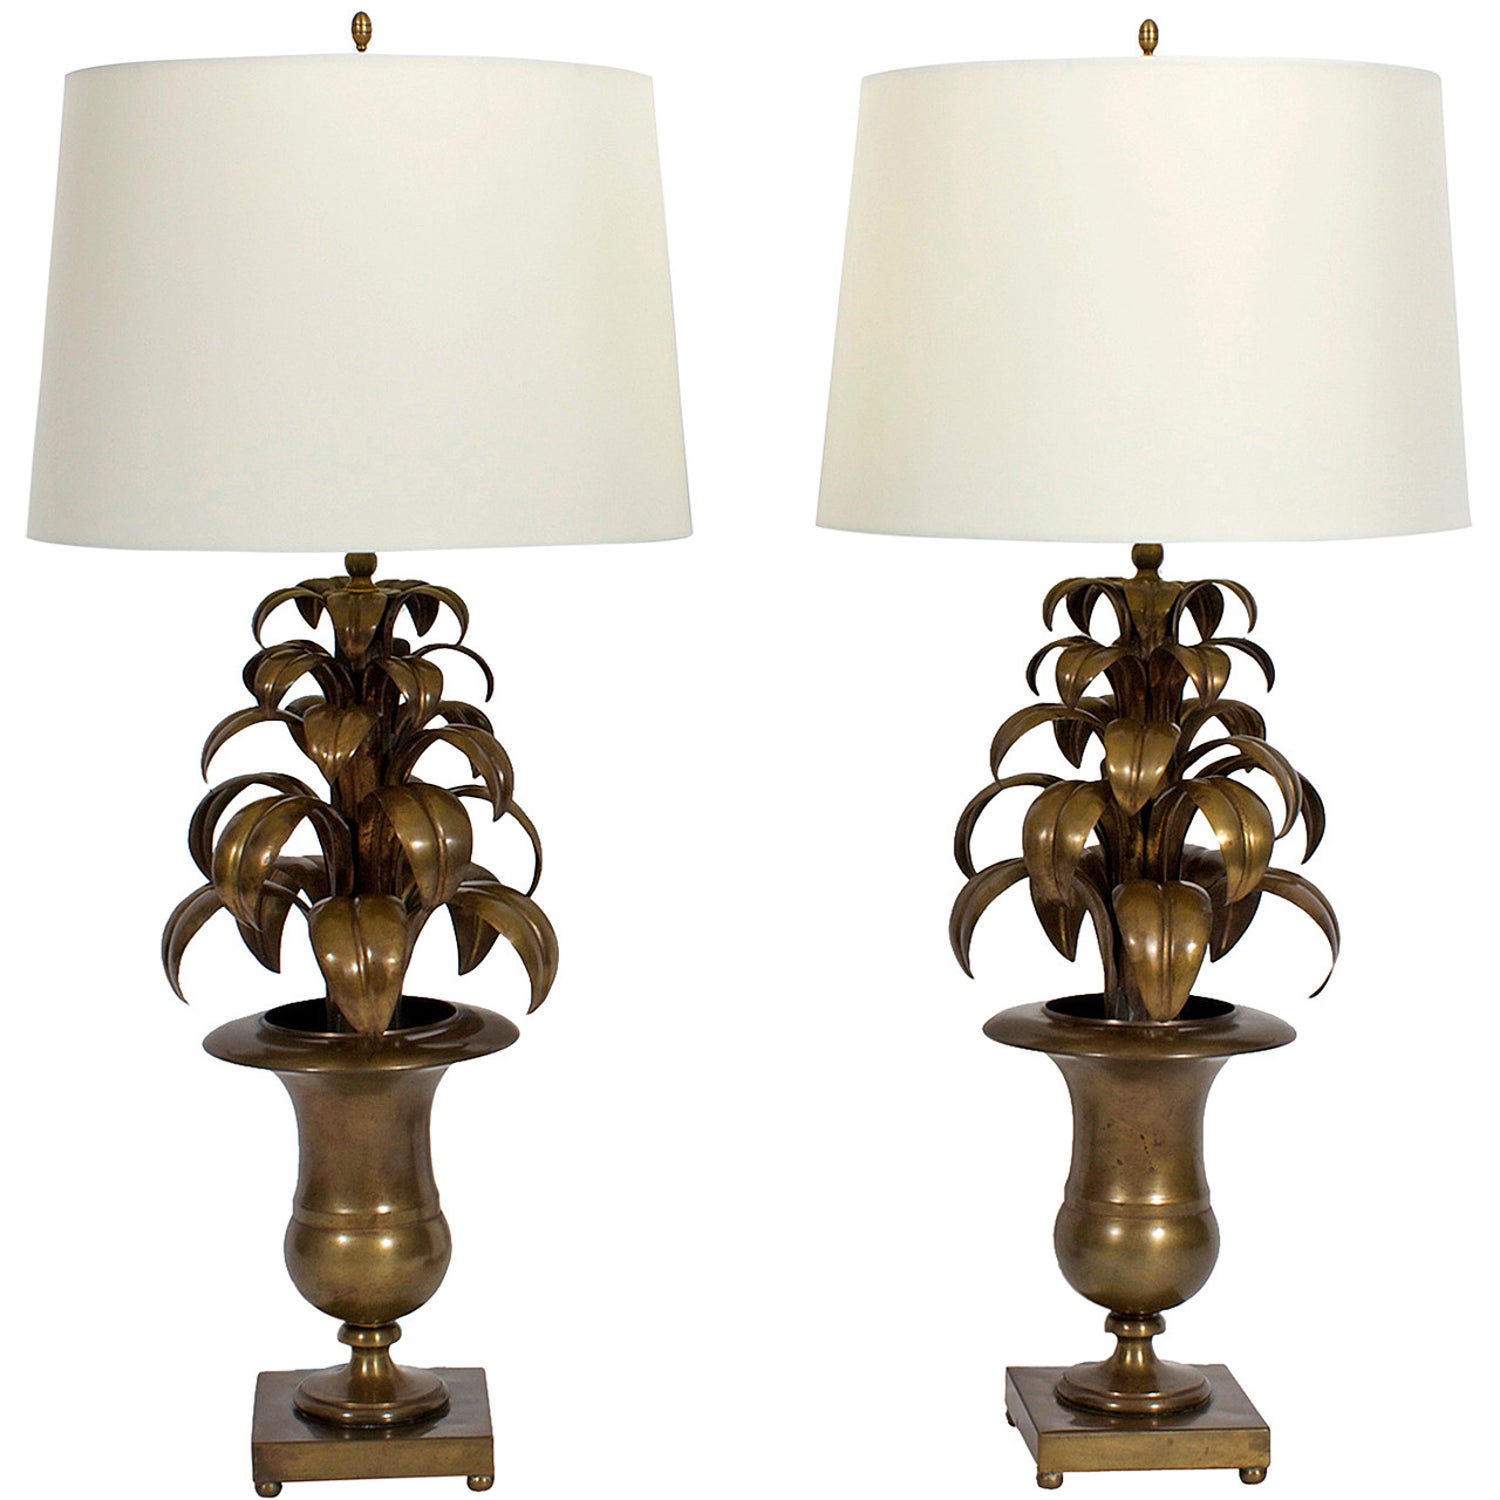 Pair of Italian Brass Tropical Leaf Lamps For Sale at 1stDibs